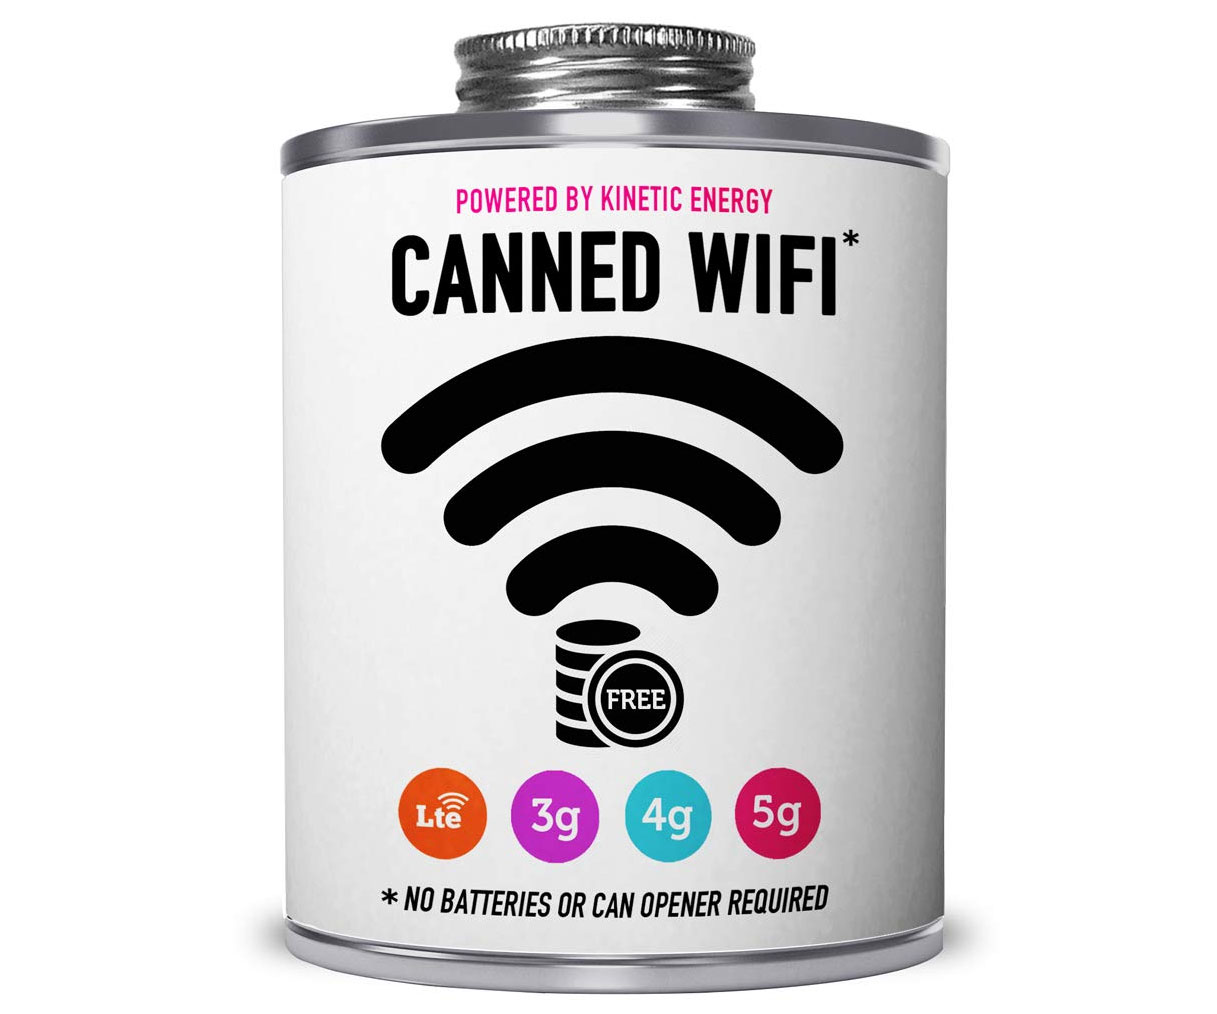 Canned WiFi